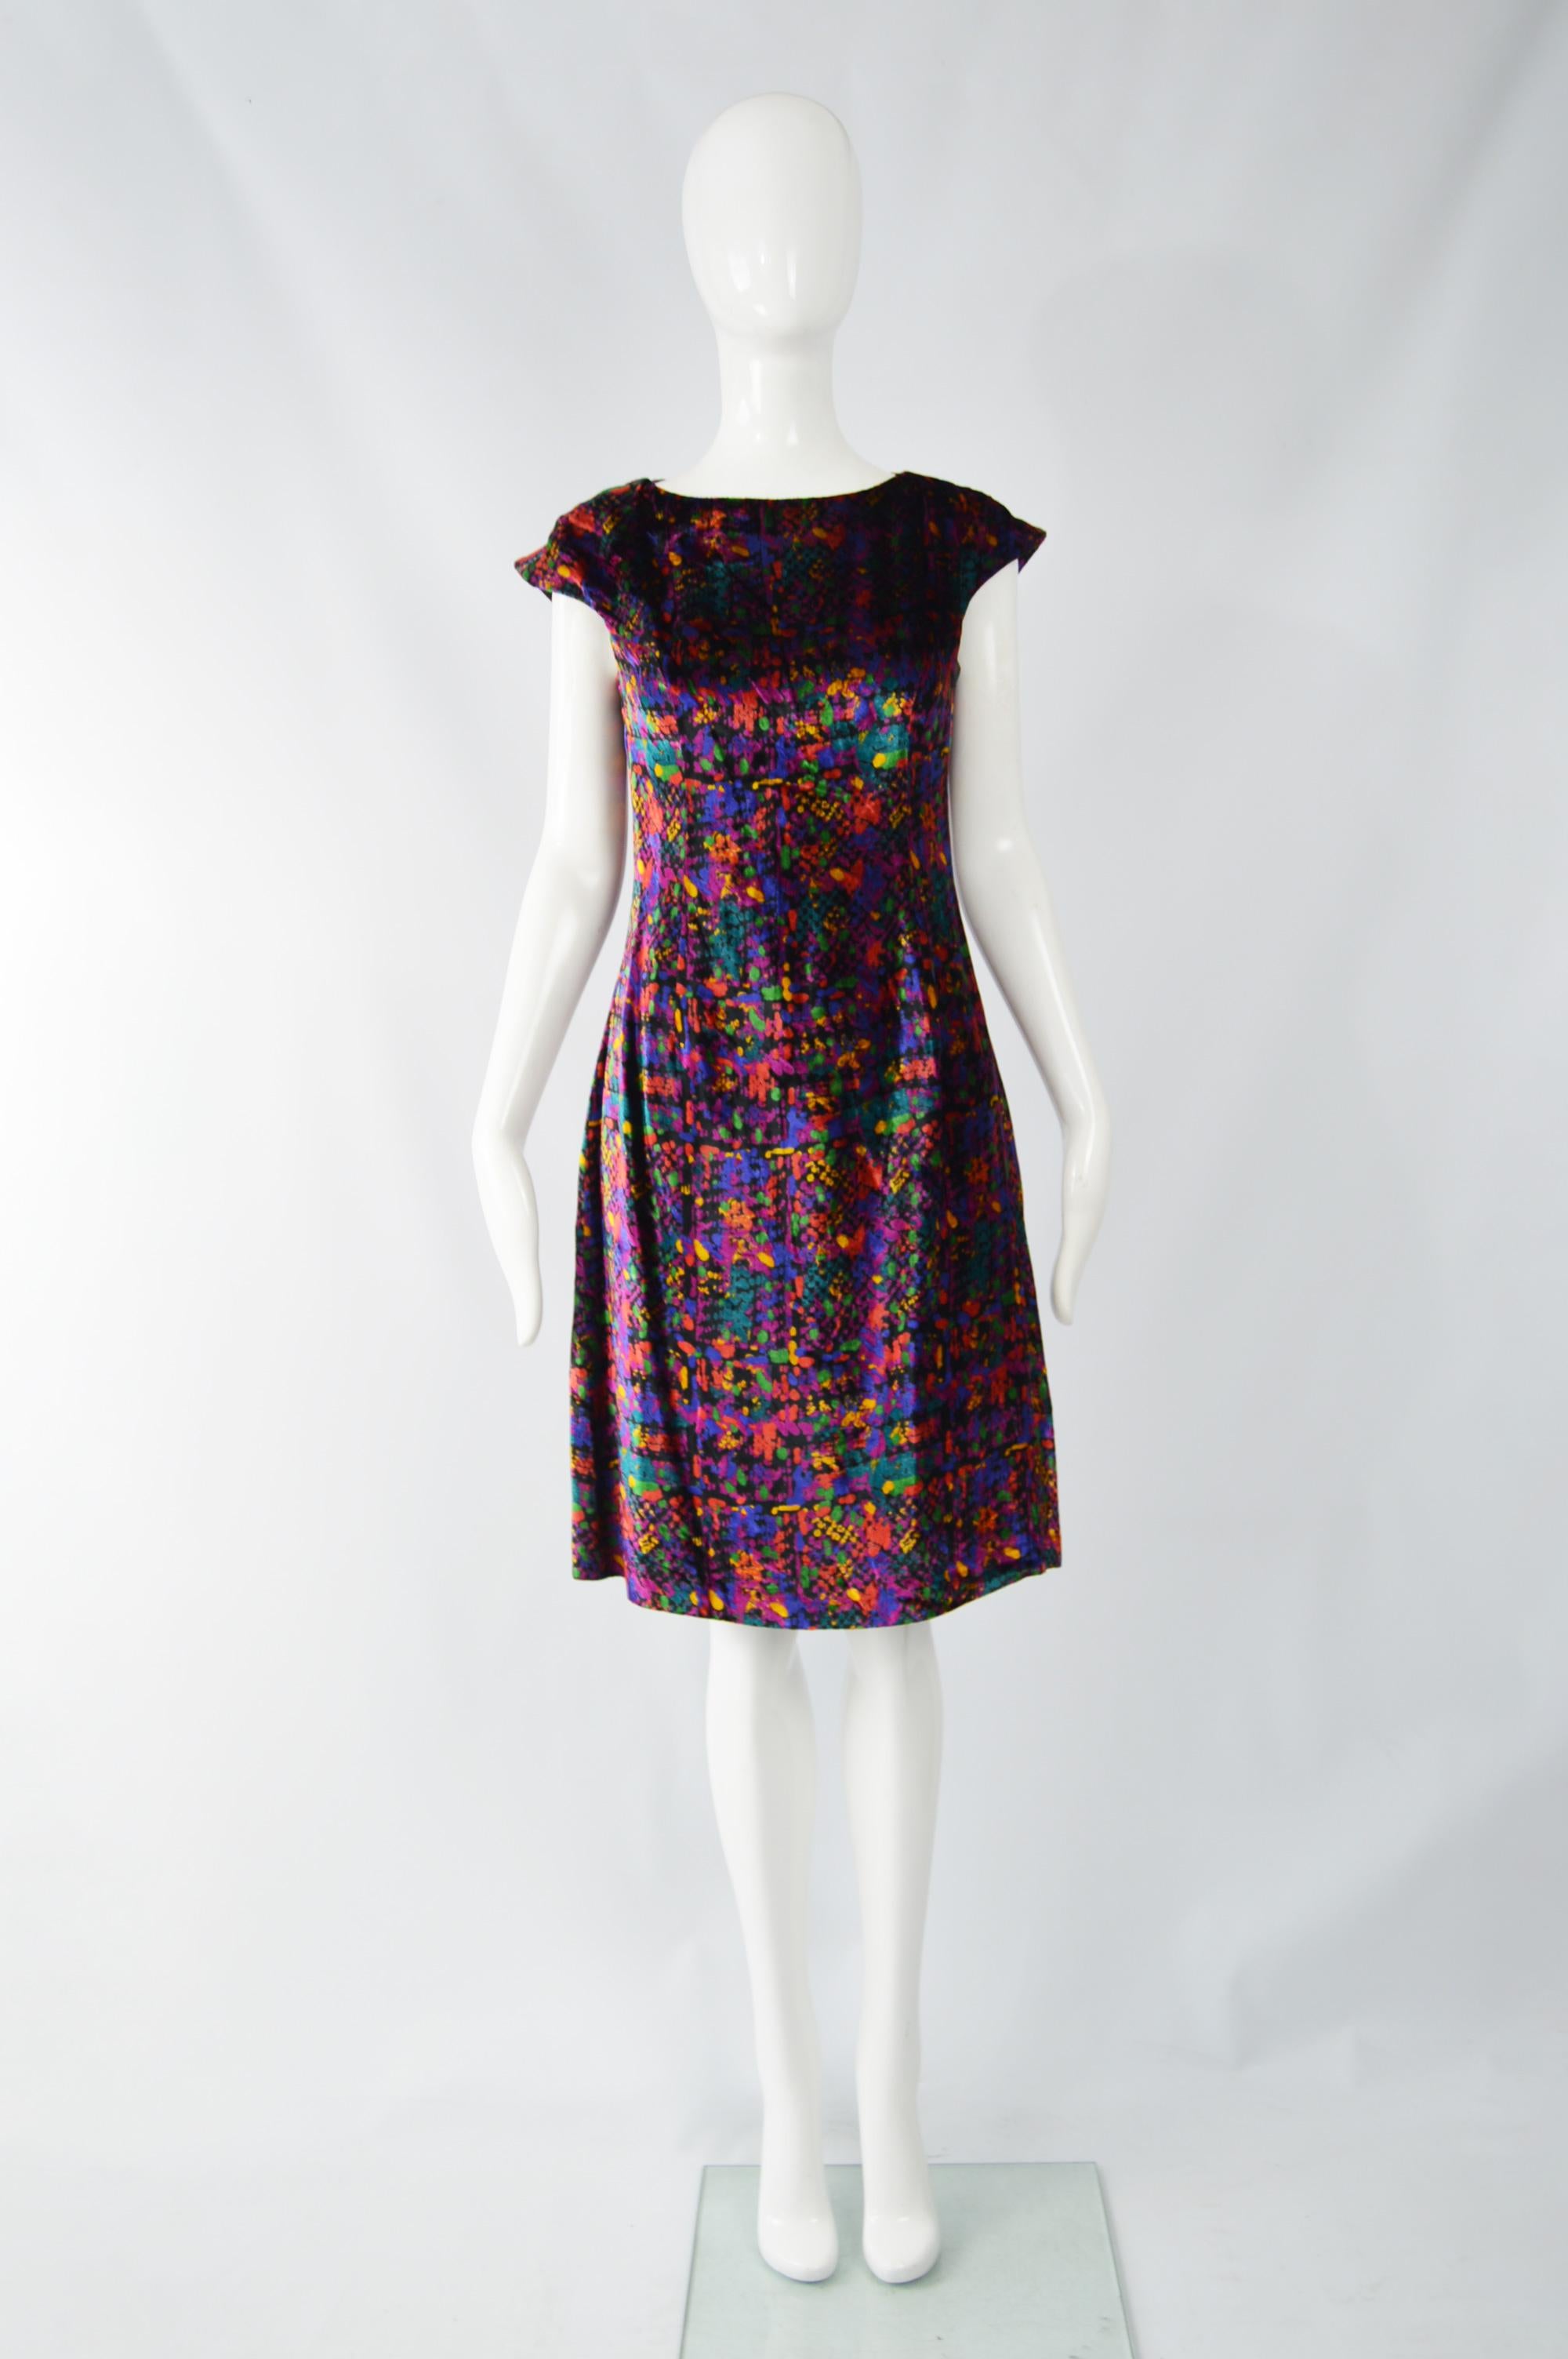 A fabulous vintage womens cocktail / party dress from the 90s by luxury Italian fashion house, Versace for the Versus line. In a sumputuous purple velvet with a multicolored, optical illusion print throughout. 

Size: Marked IT42 which is roughly a